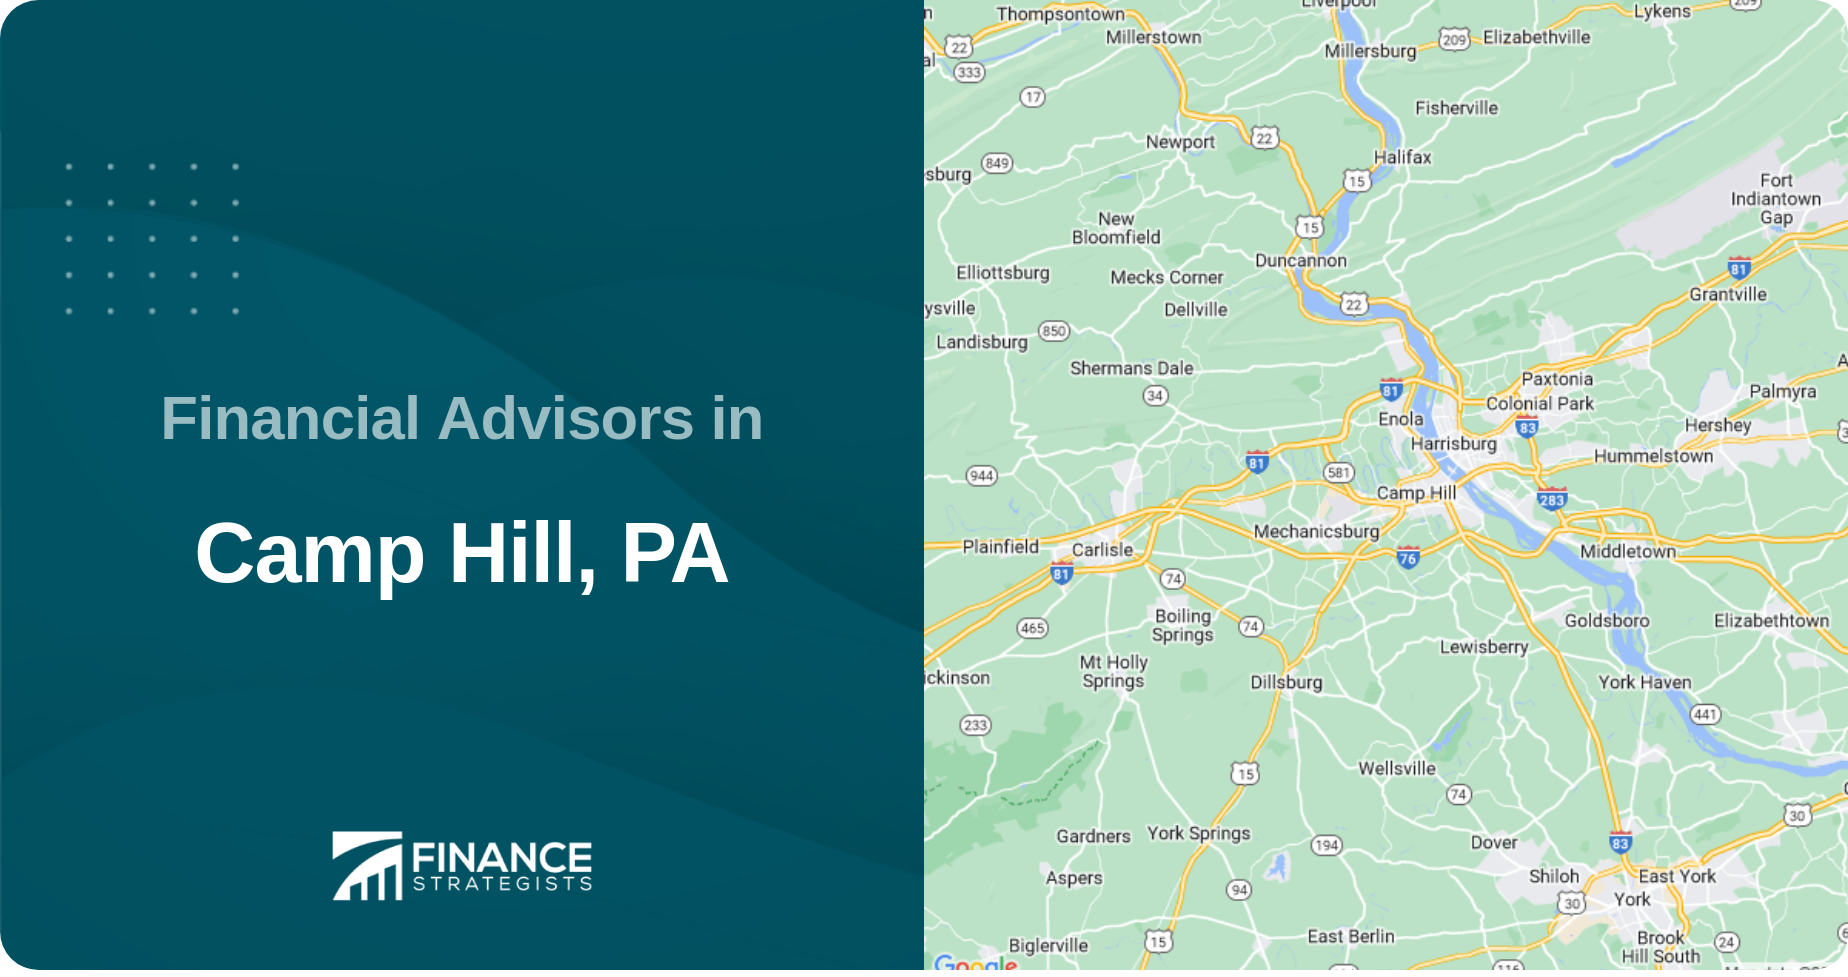 Financial Advisors in Camp Hill, PA